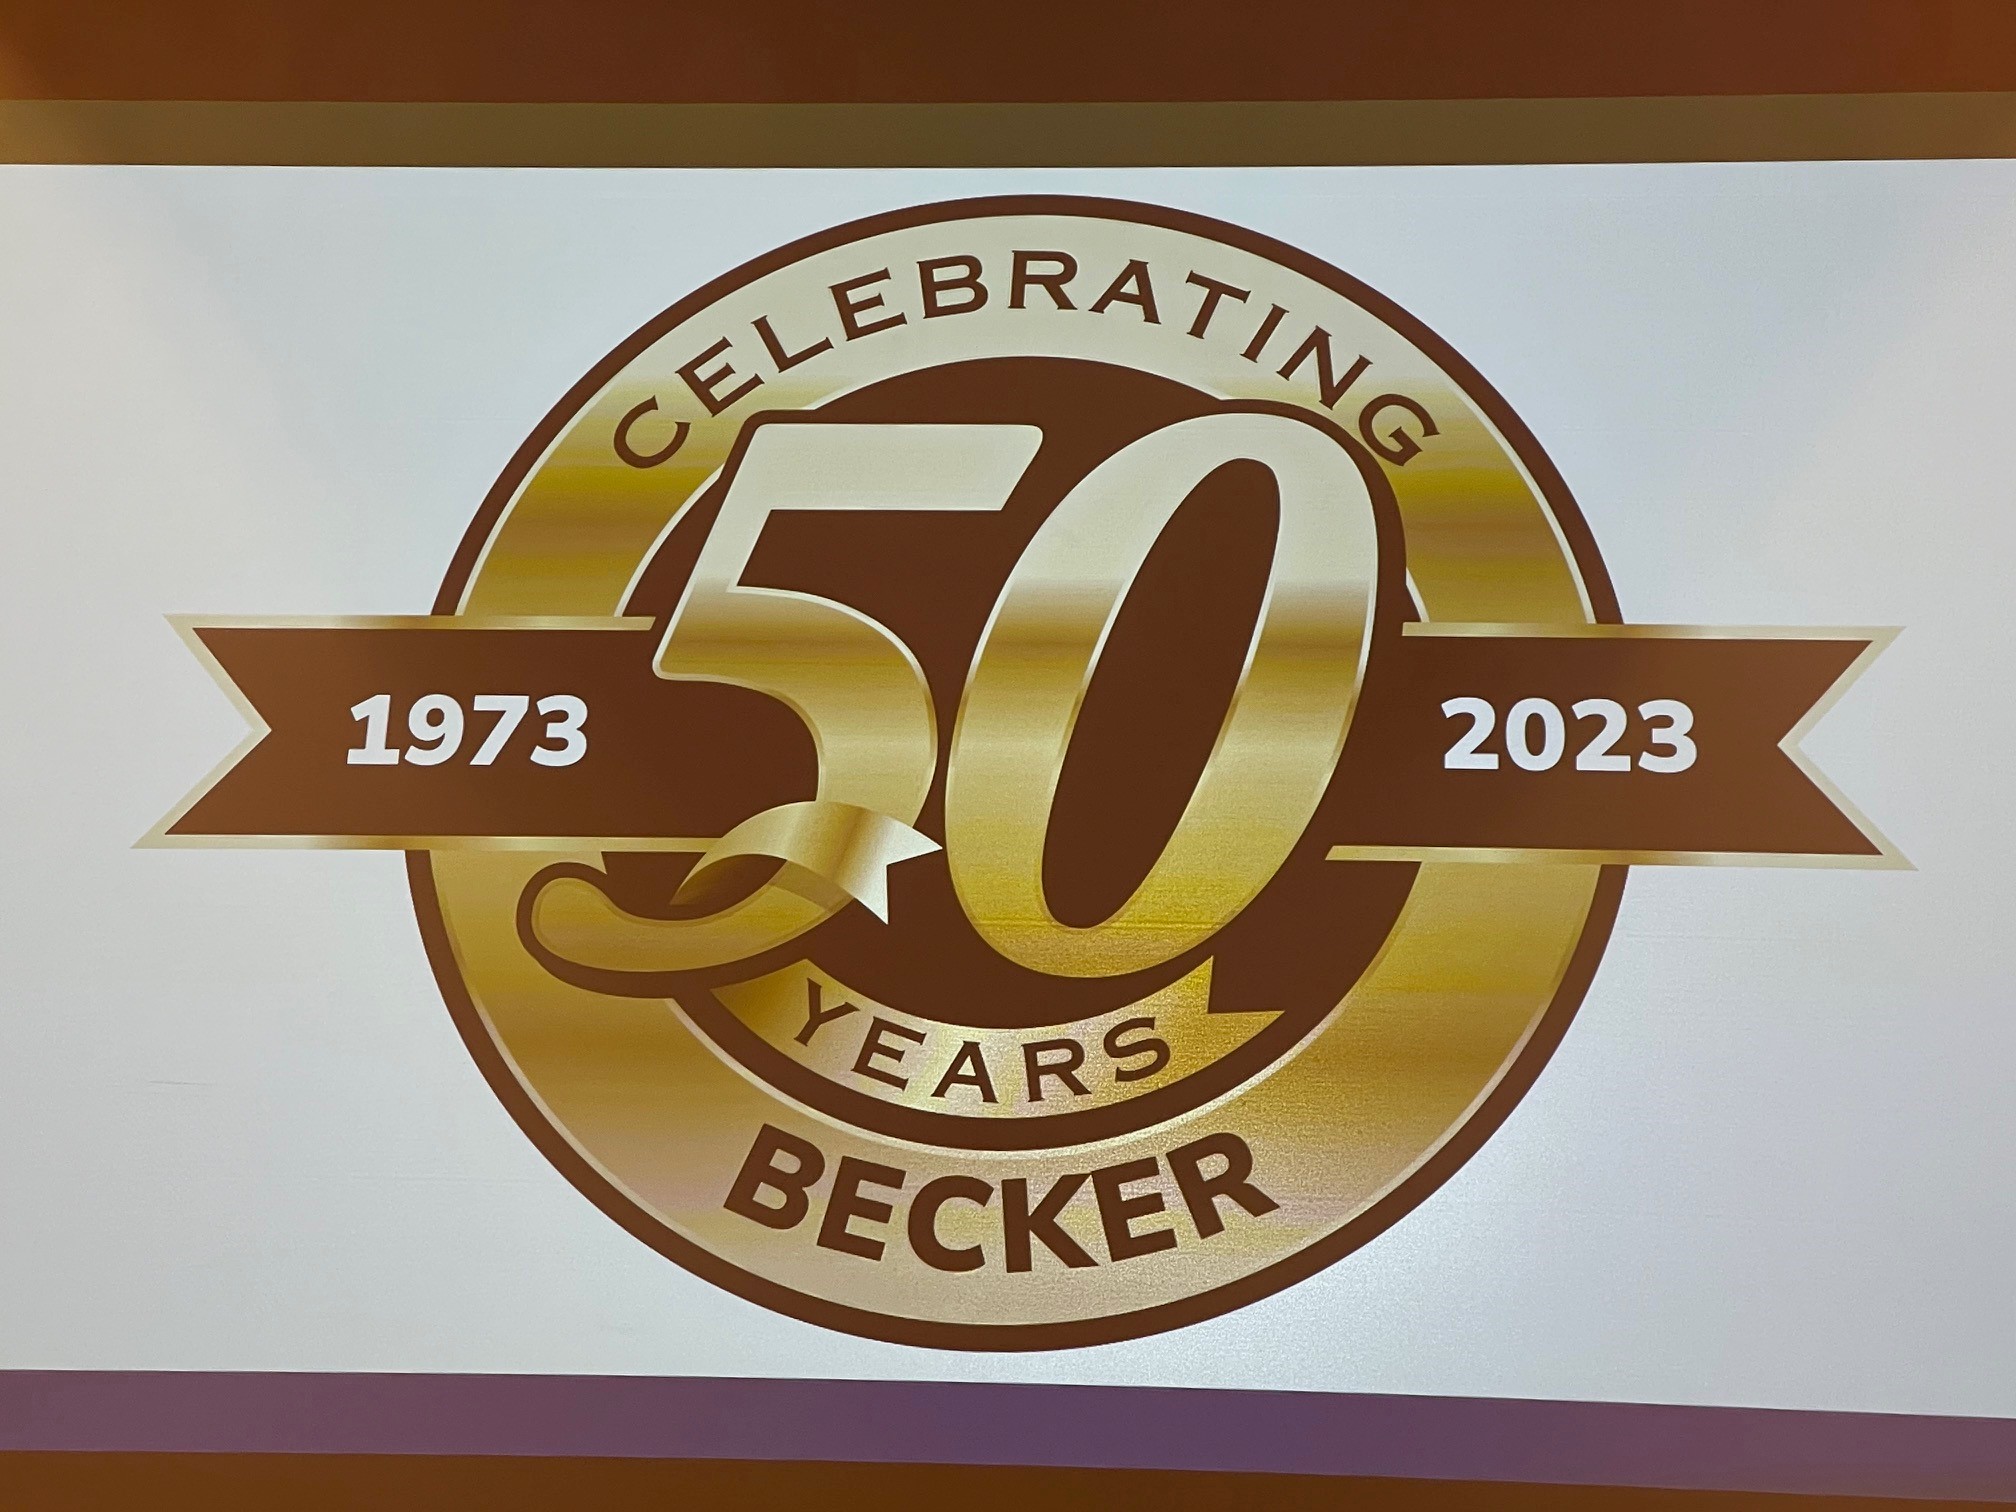 Becker – Poliakoff USA is celebrating 50 years of legal excellence